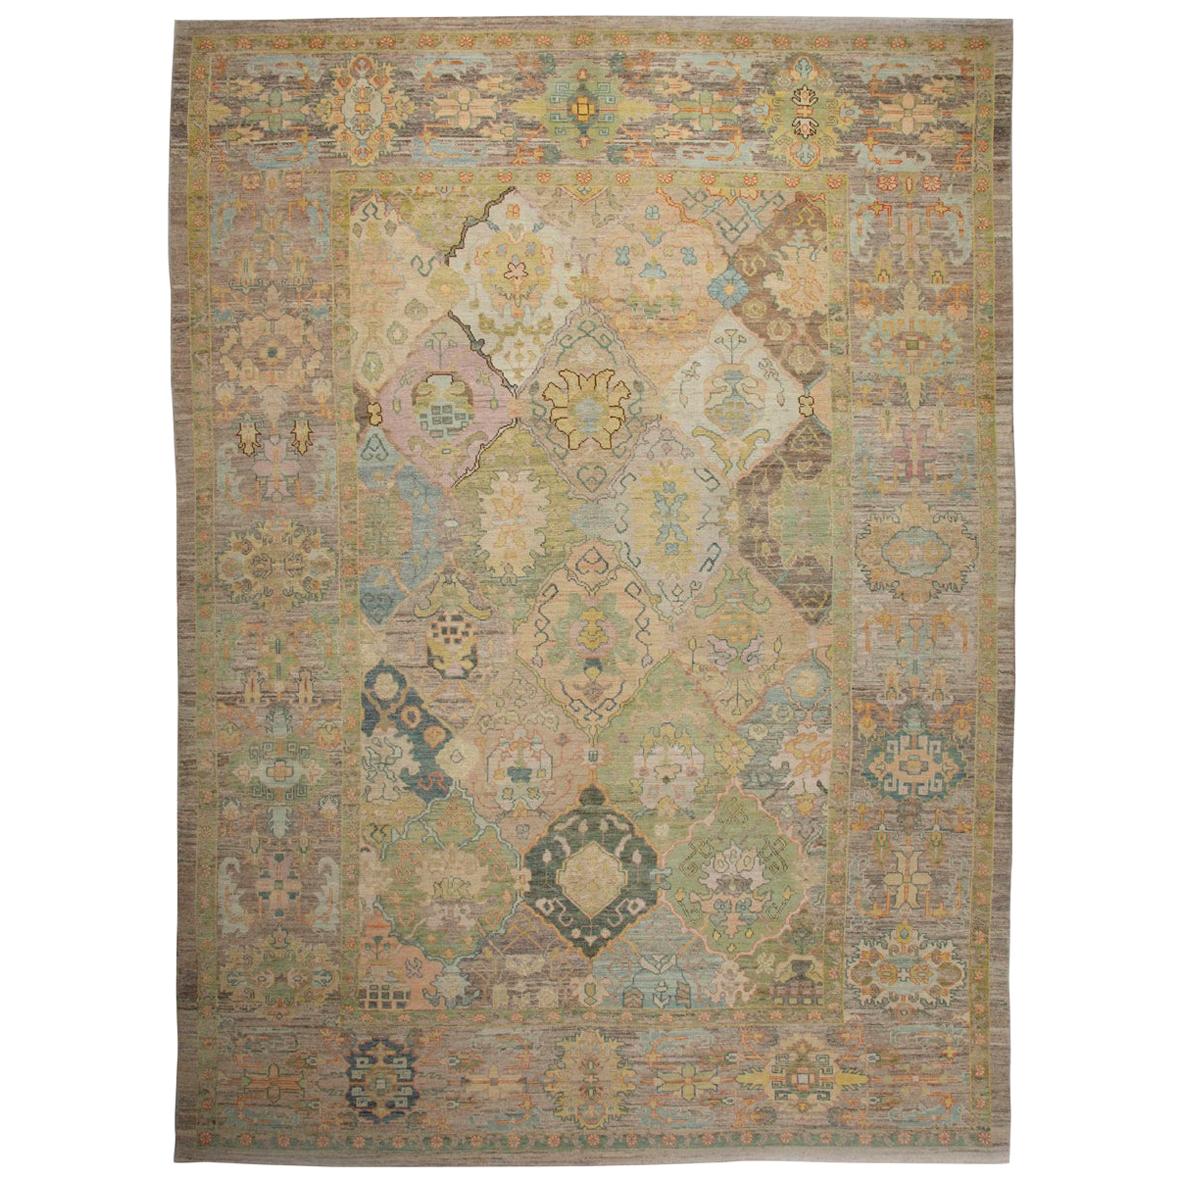 Contemporary Turkish Rug Oushak Style with Colorful Diamond Flower Medallions